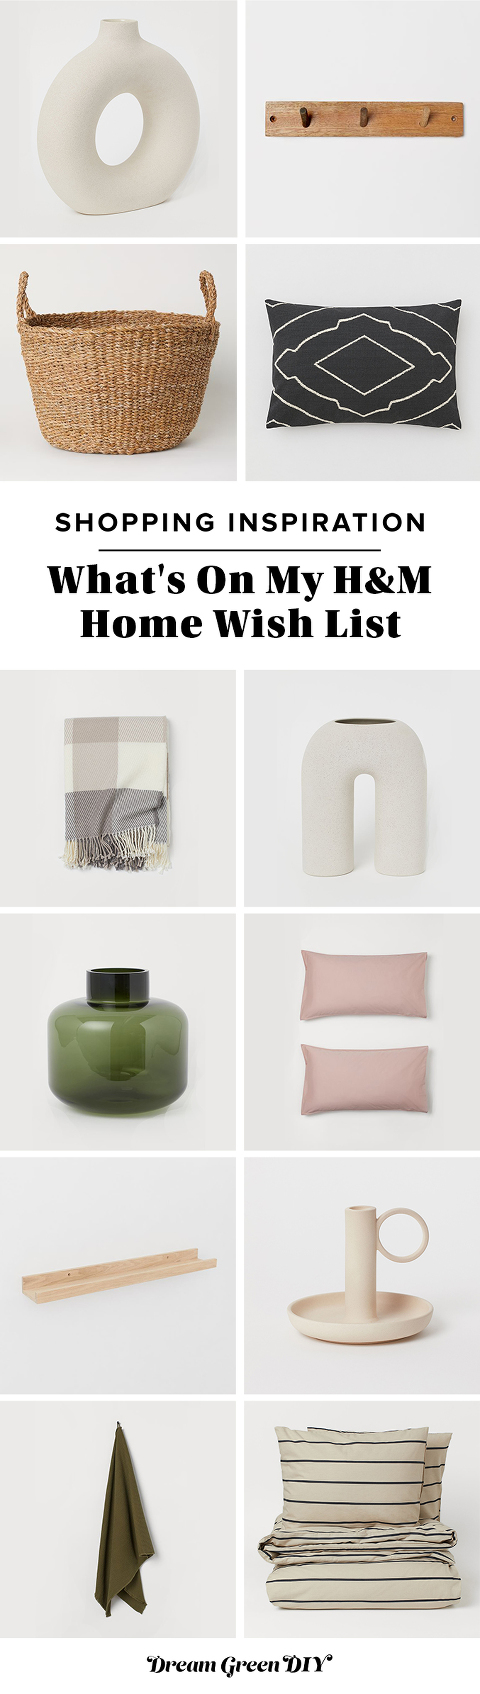 What's On My H&M Home Wish List